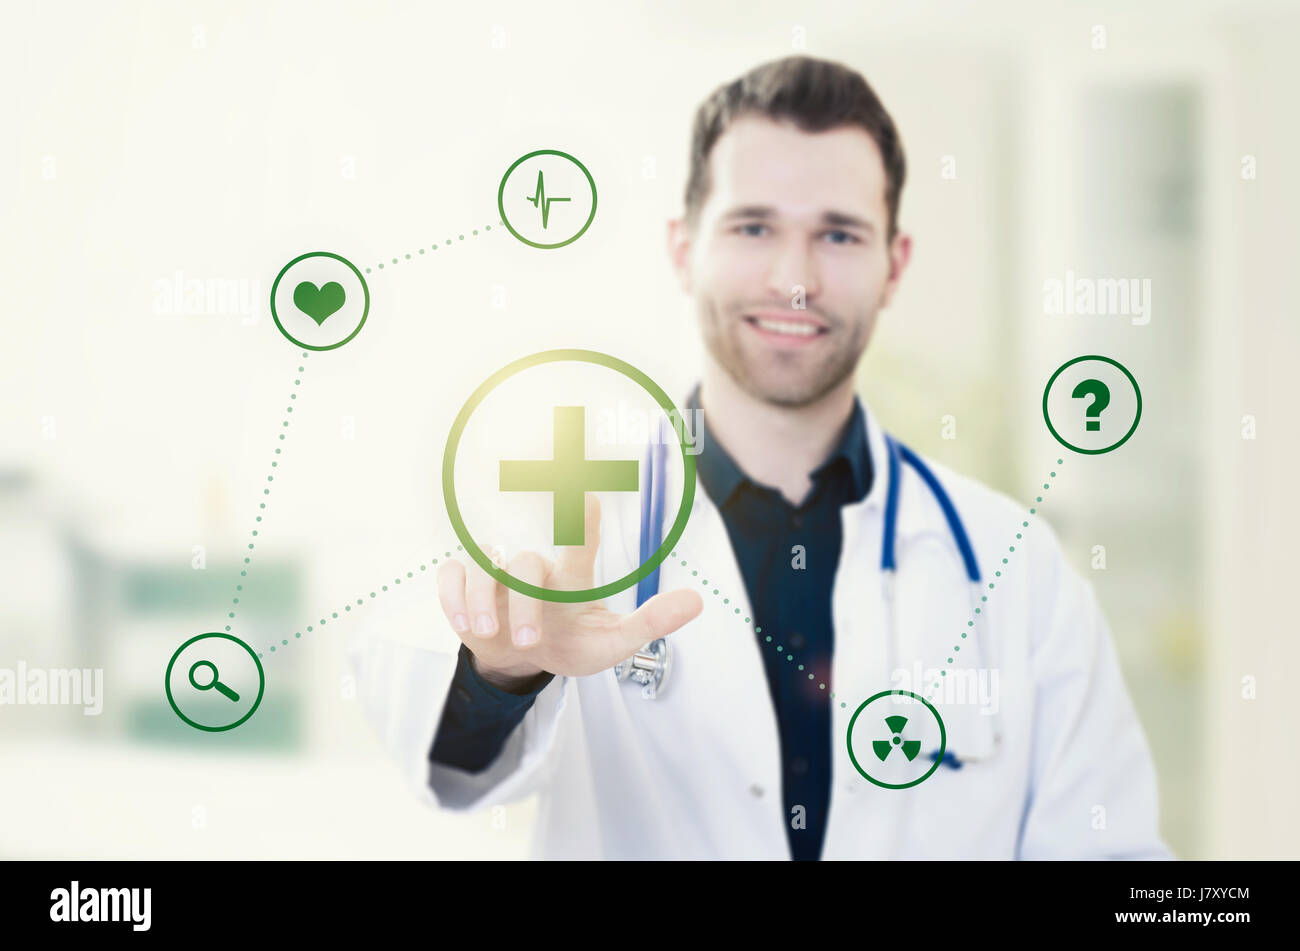 Doctor touching screen with icons. Futuristic medicine. Doctor medical technology icon healthcare screen touching data concept Stock Photo